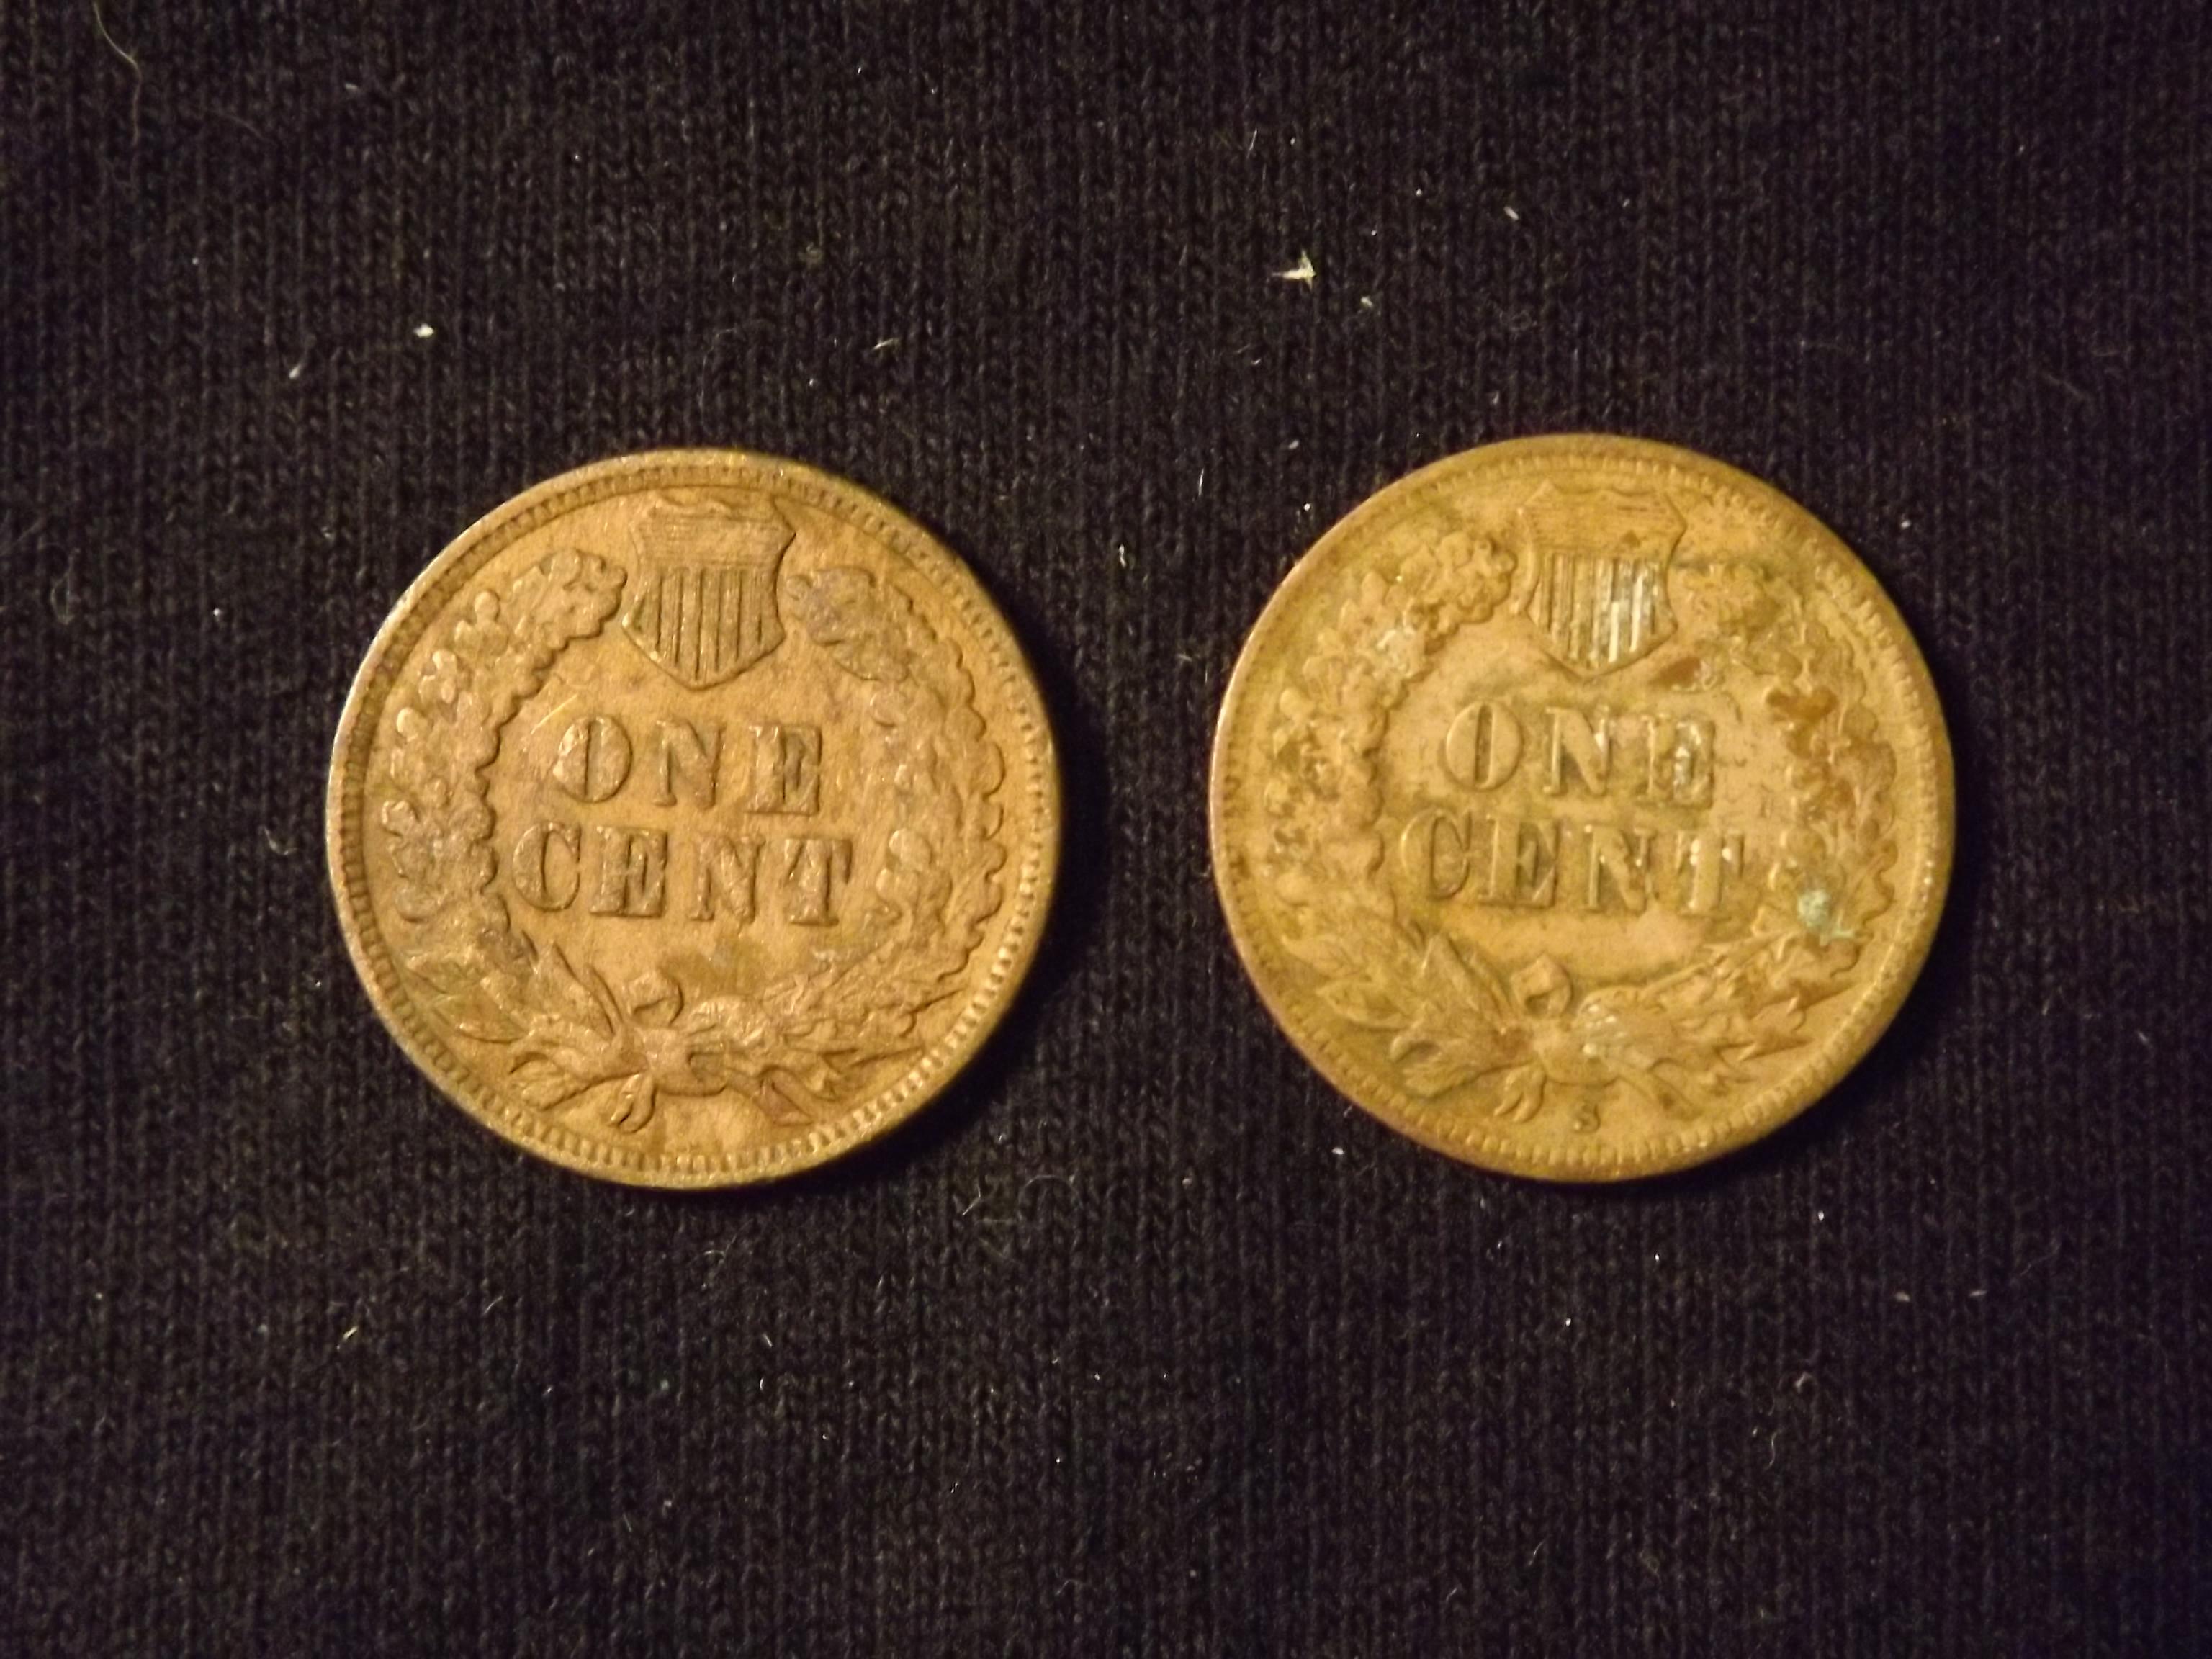 2 Indian Cents